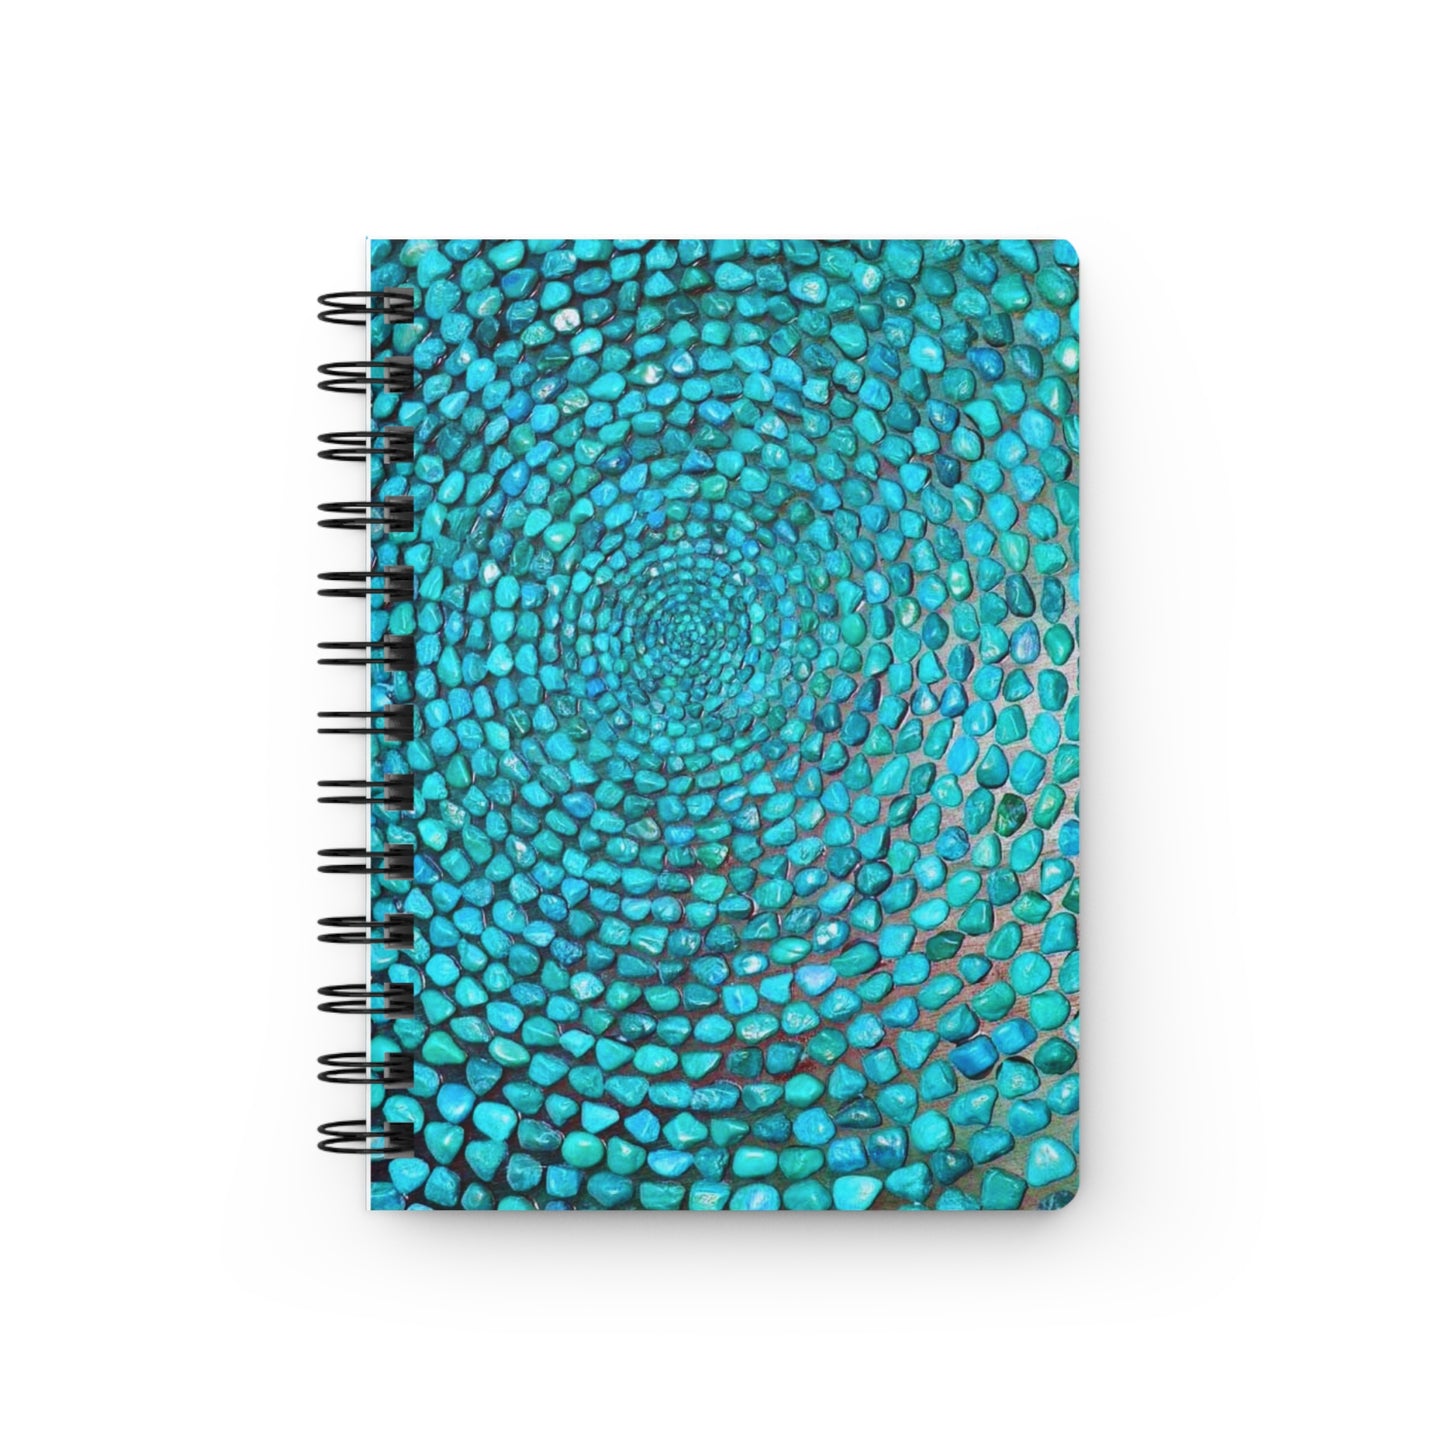 Turquoise Stone Writing Sketch Inspiration Travel  Spiral Bound Journal